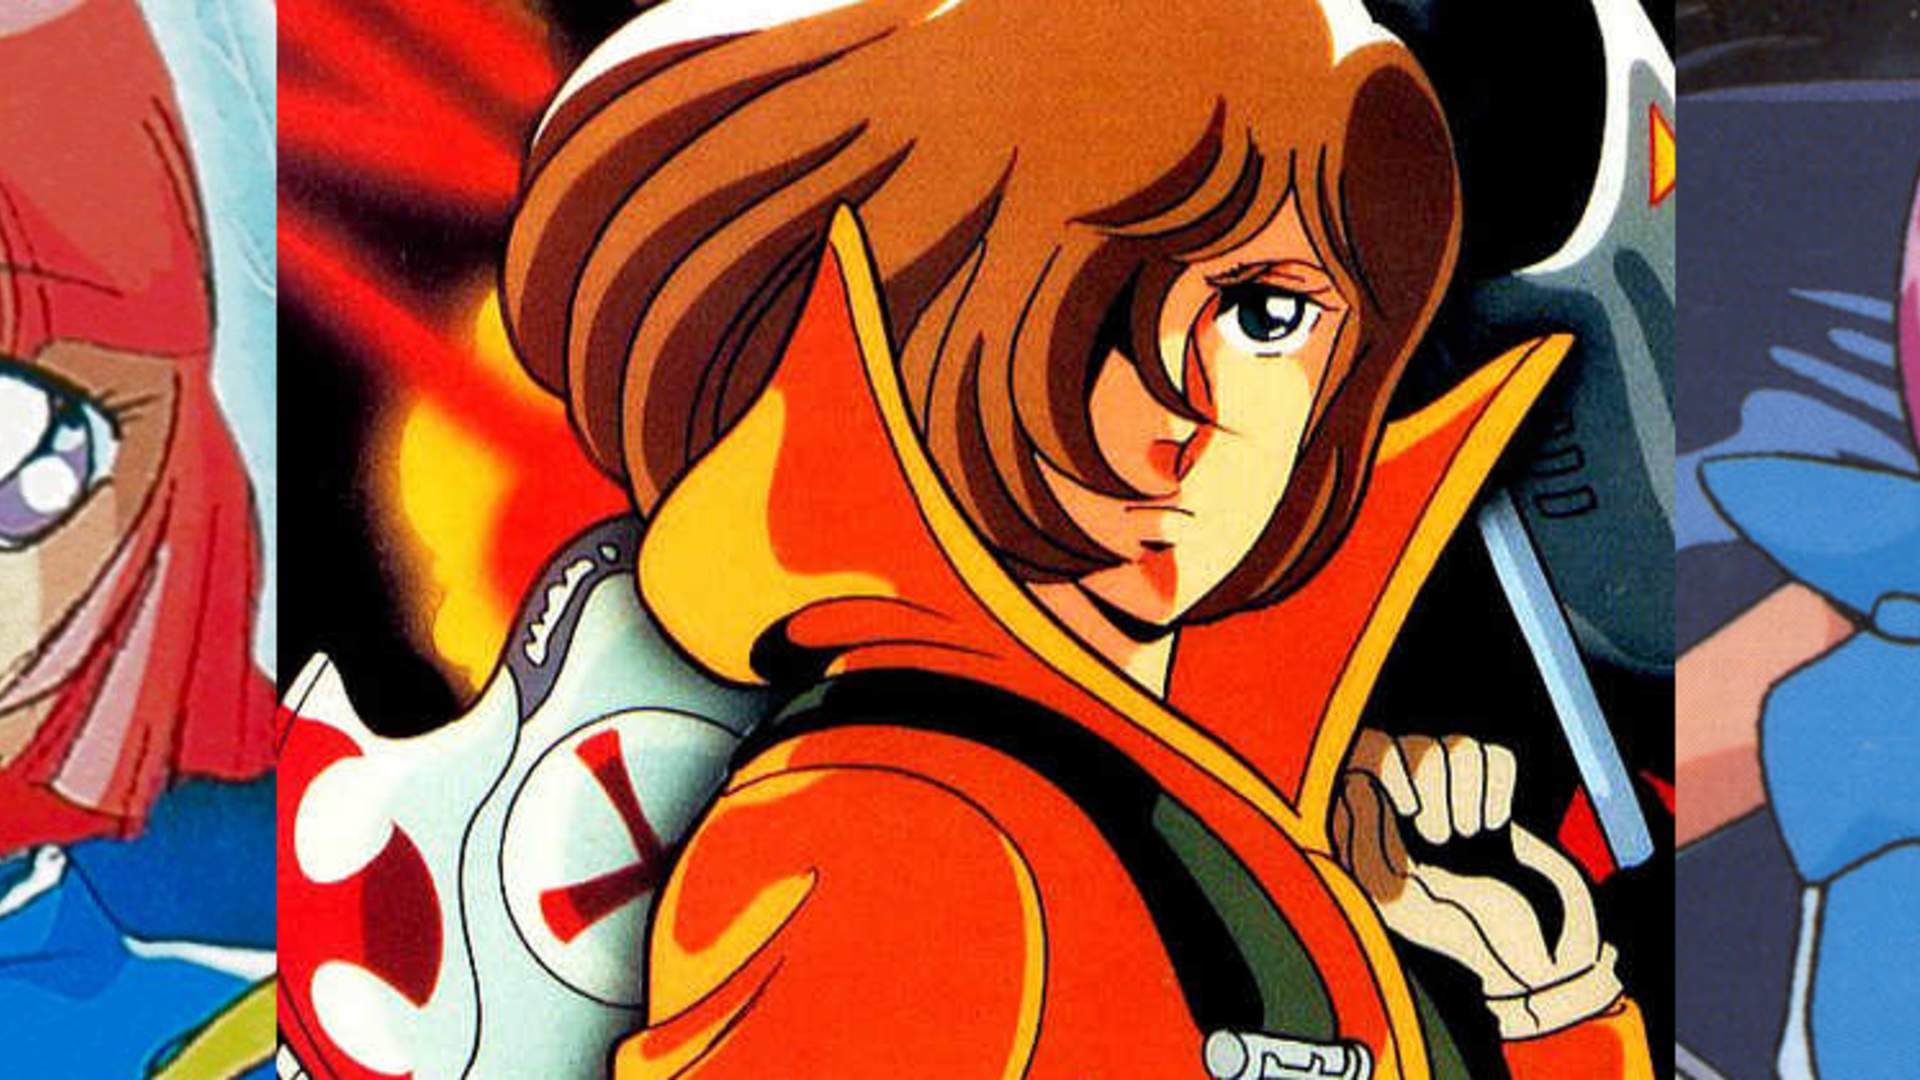 1989: The Year Anime Invaded the US Games Business